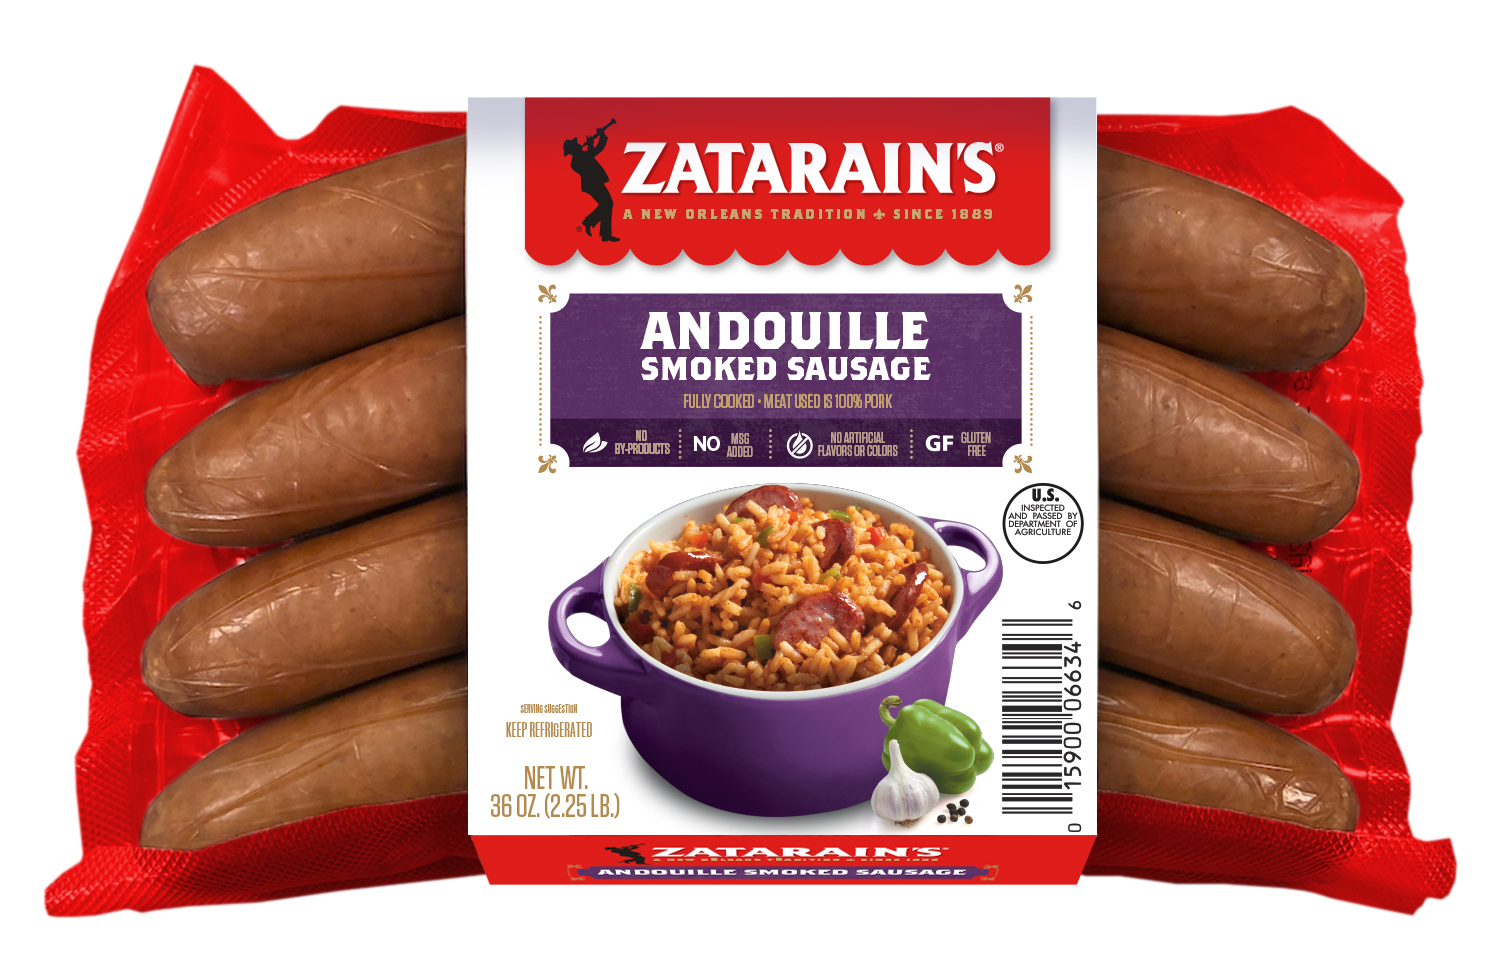 Zatarain's 2.25 lb packages can be found at Sam's Club